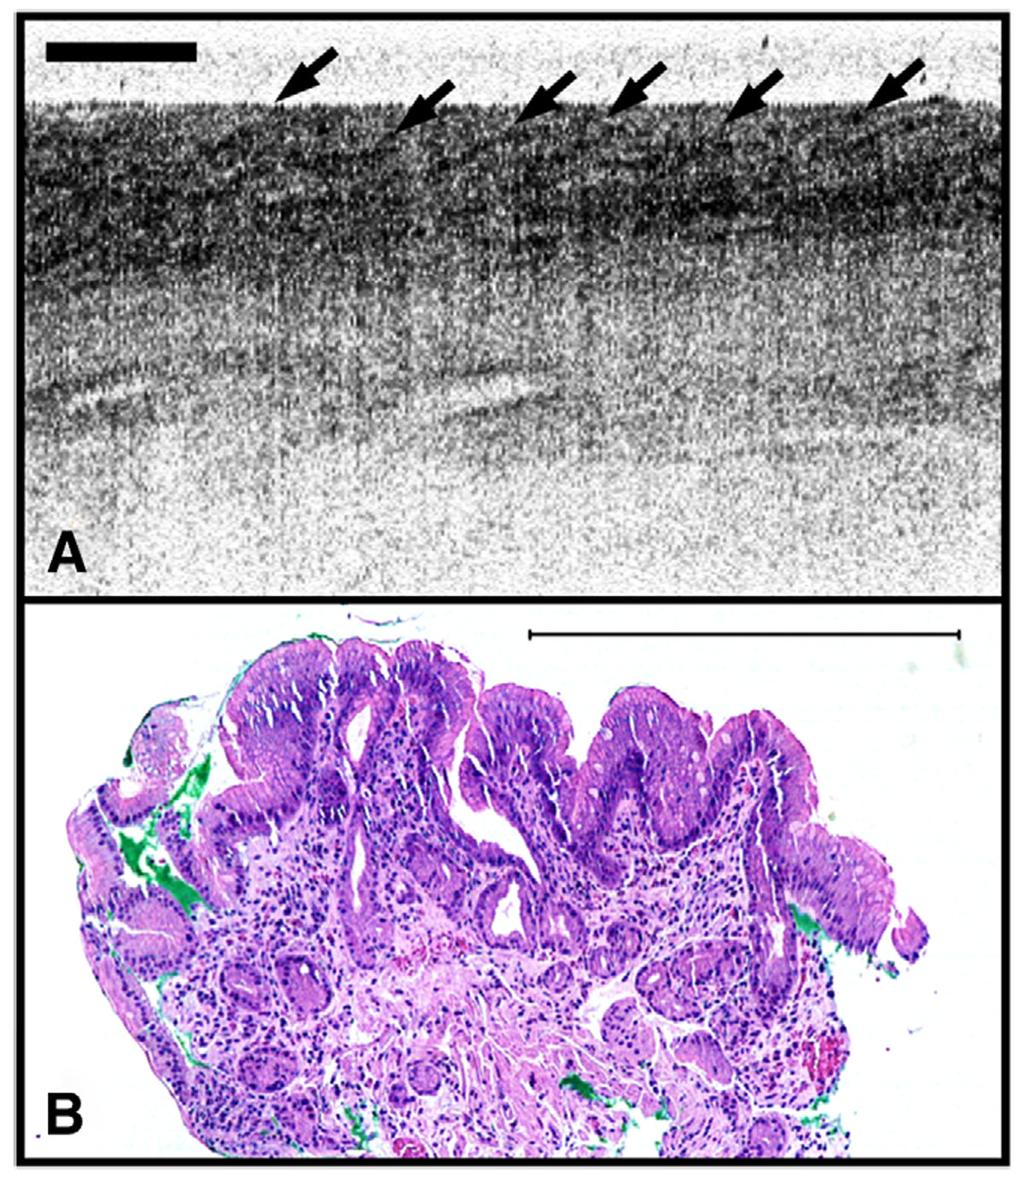 Evans et al. Page 9 Figure 2. Images of SIM with a layered architecture. A, Horizontal layered architecture can be visualized in this OCT image of SIM.